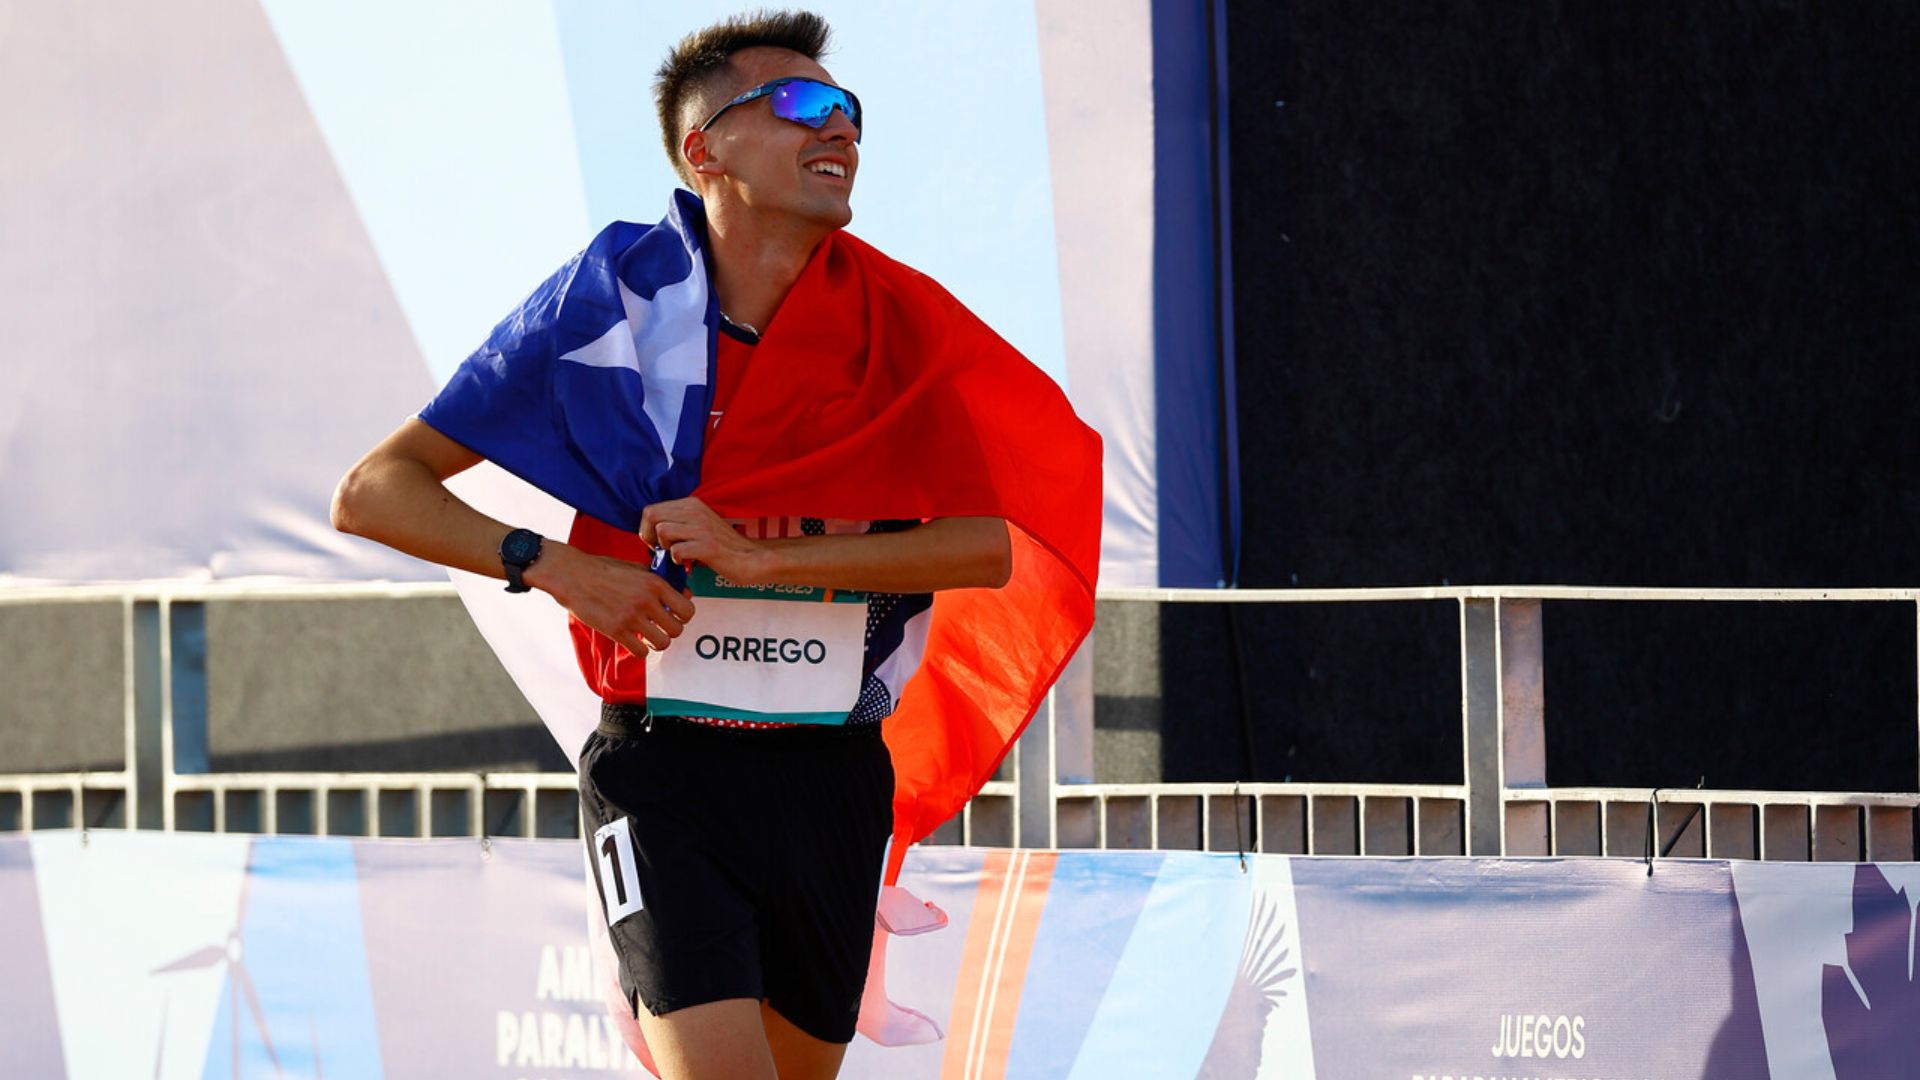 Mauricio Orrego Secures Gold for Chile in T46 1,500 meters